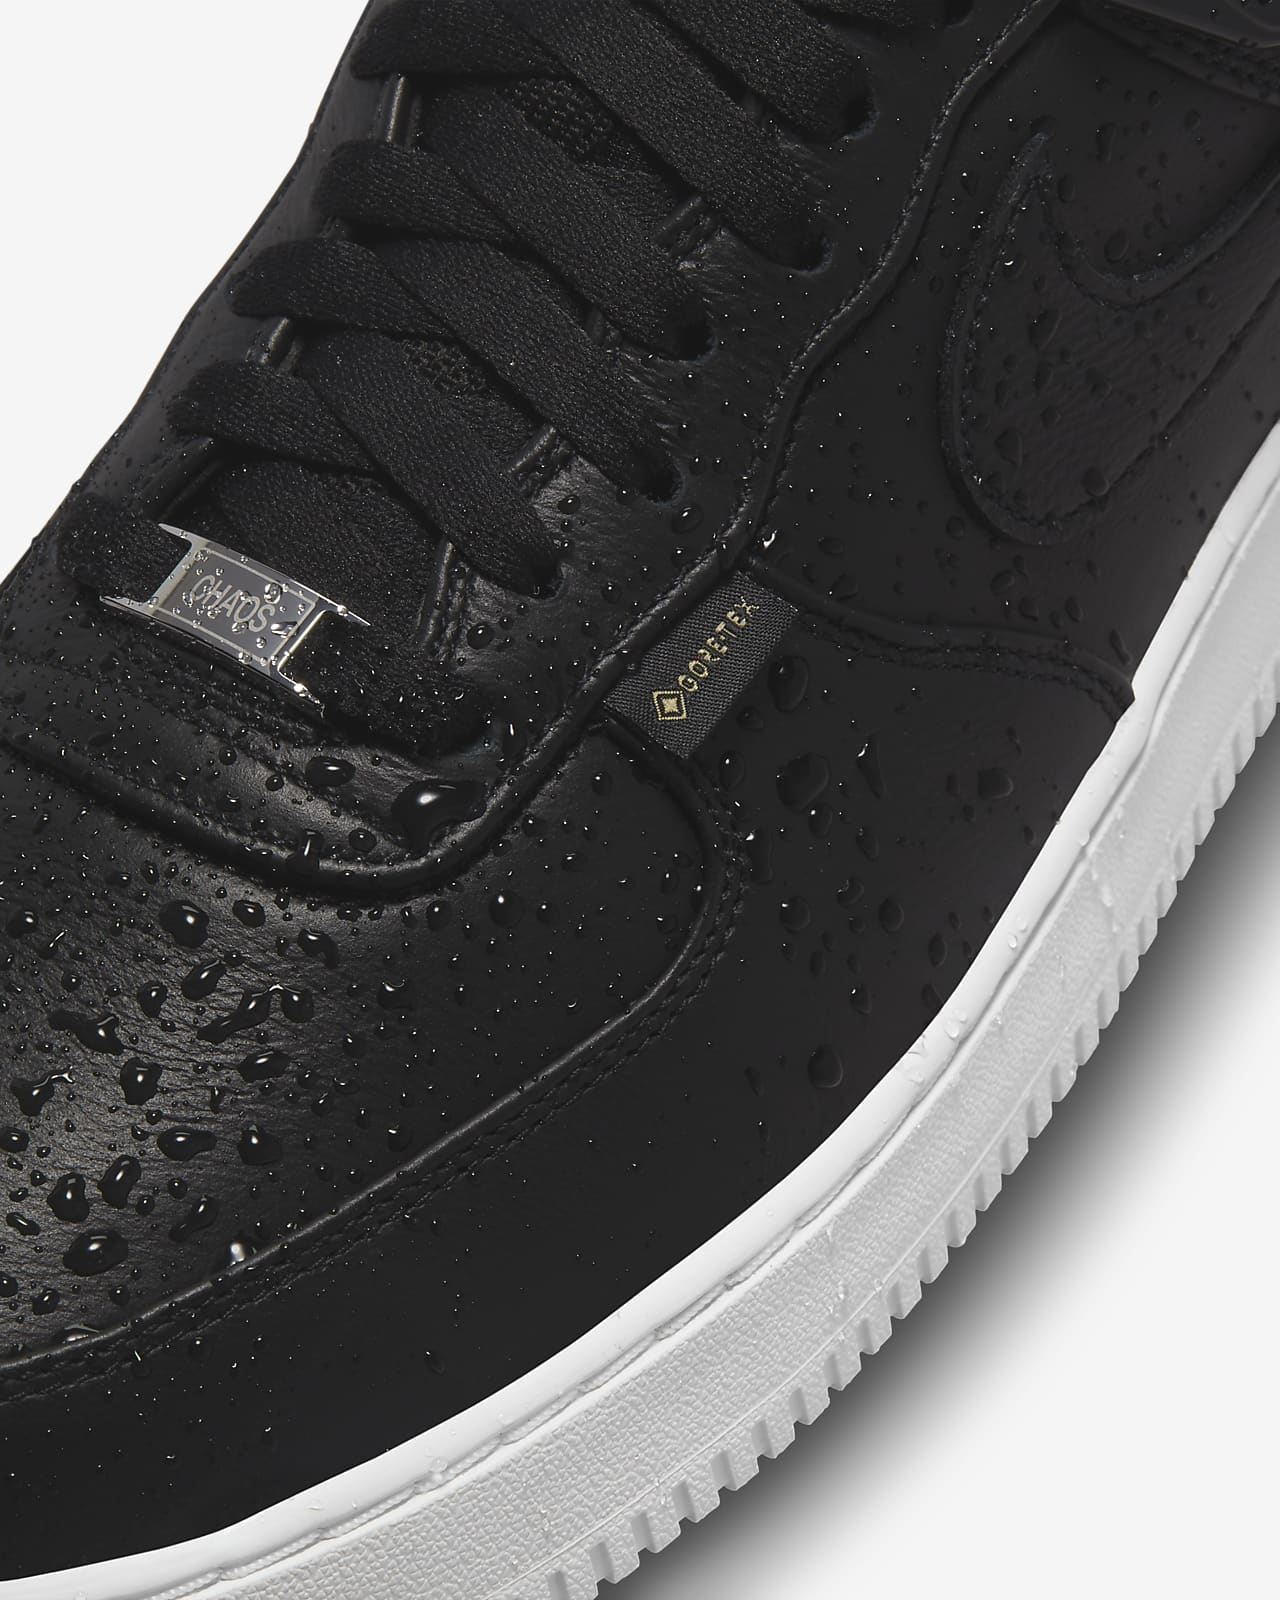 TEX 'Black' - Nike Undercover x white air jordans with 23 on back